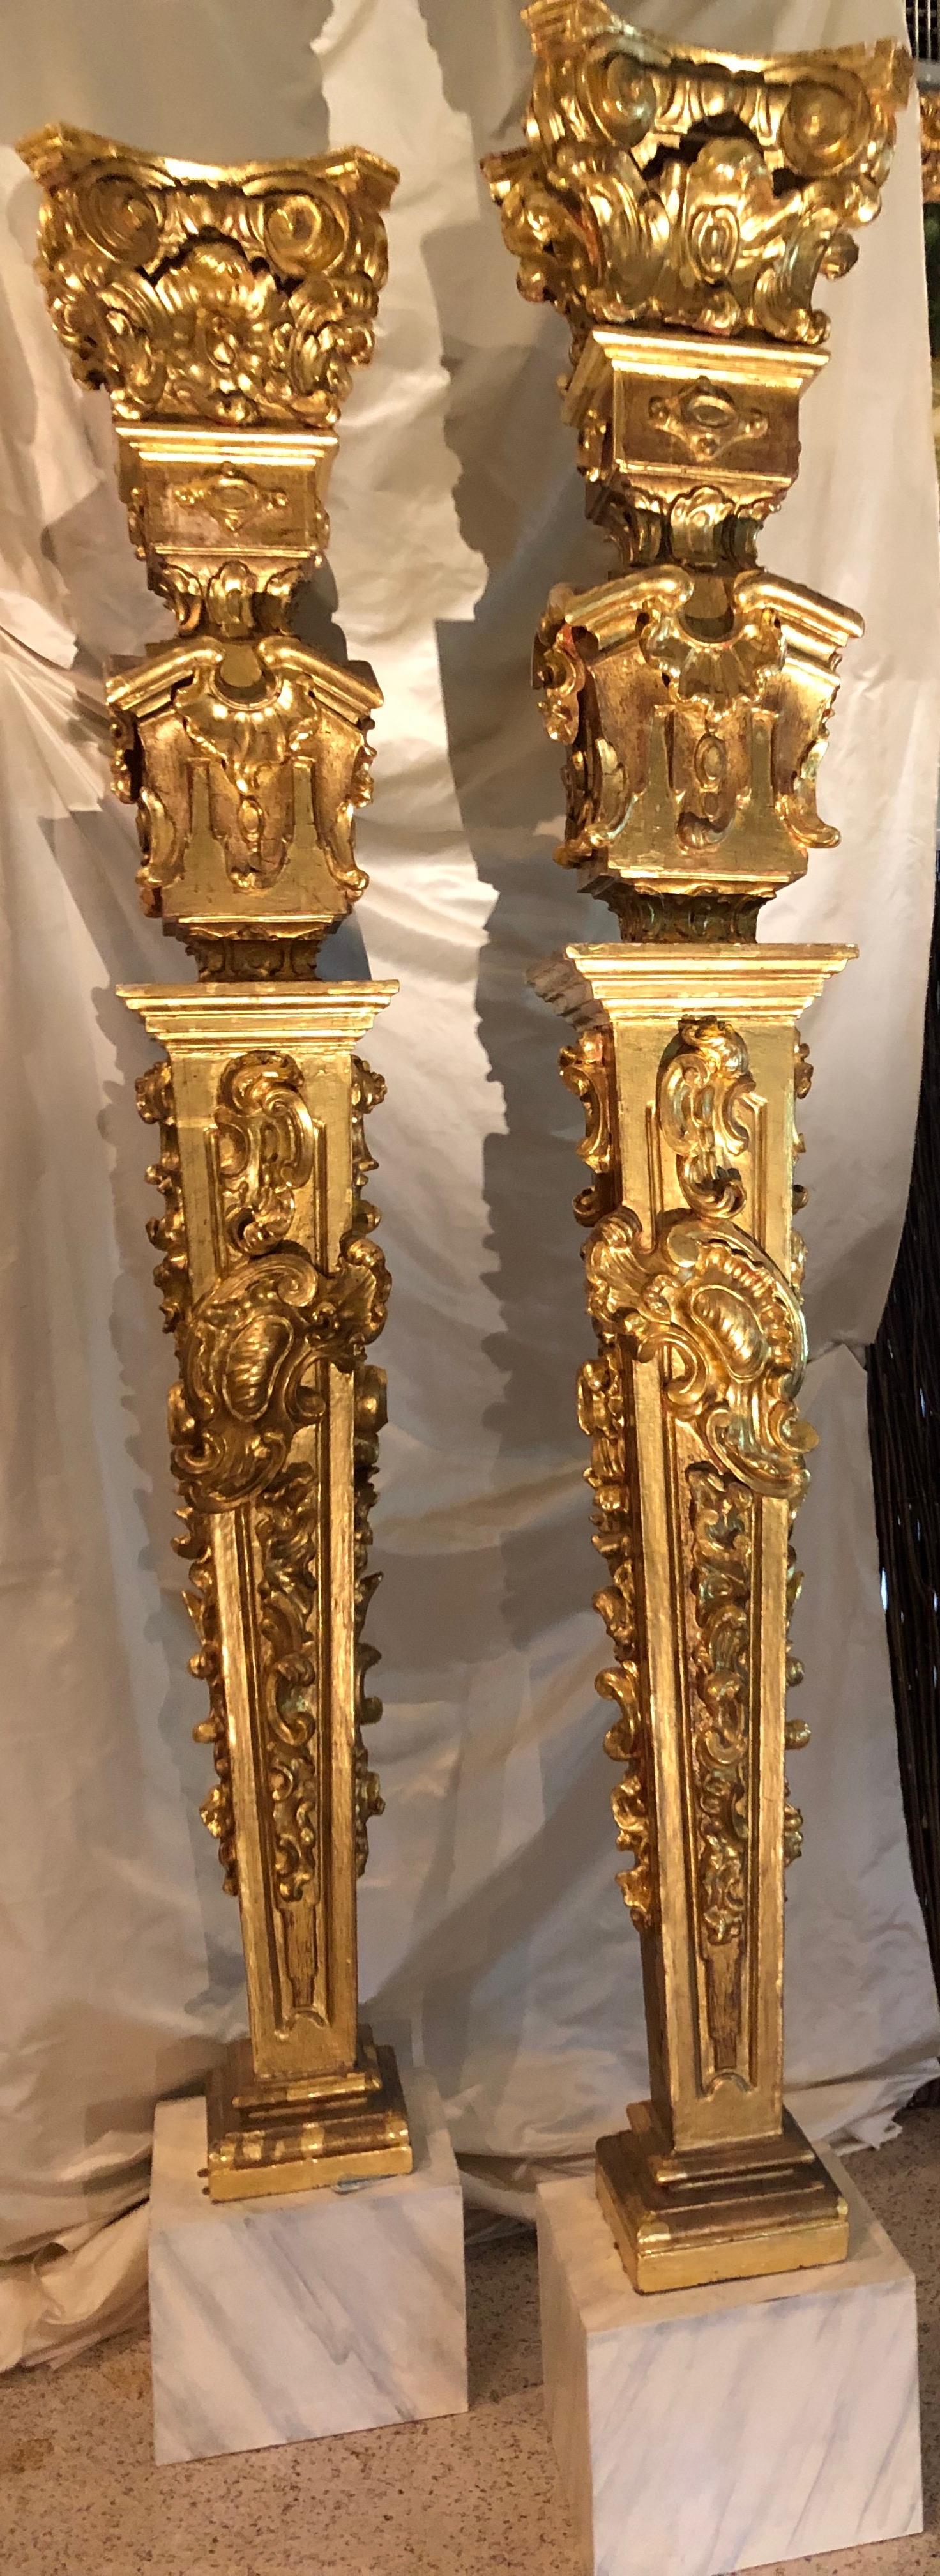 18th Century Louis XV Columns of Sculpted Giltwood a True Pair, French Rococo For Sale 1